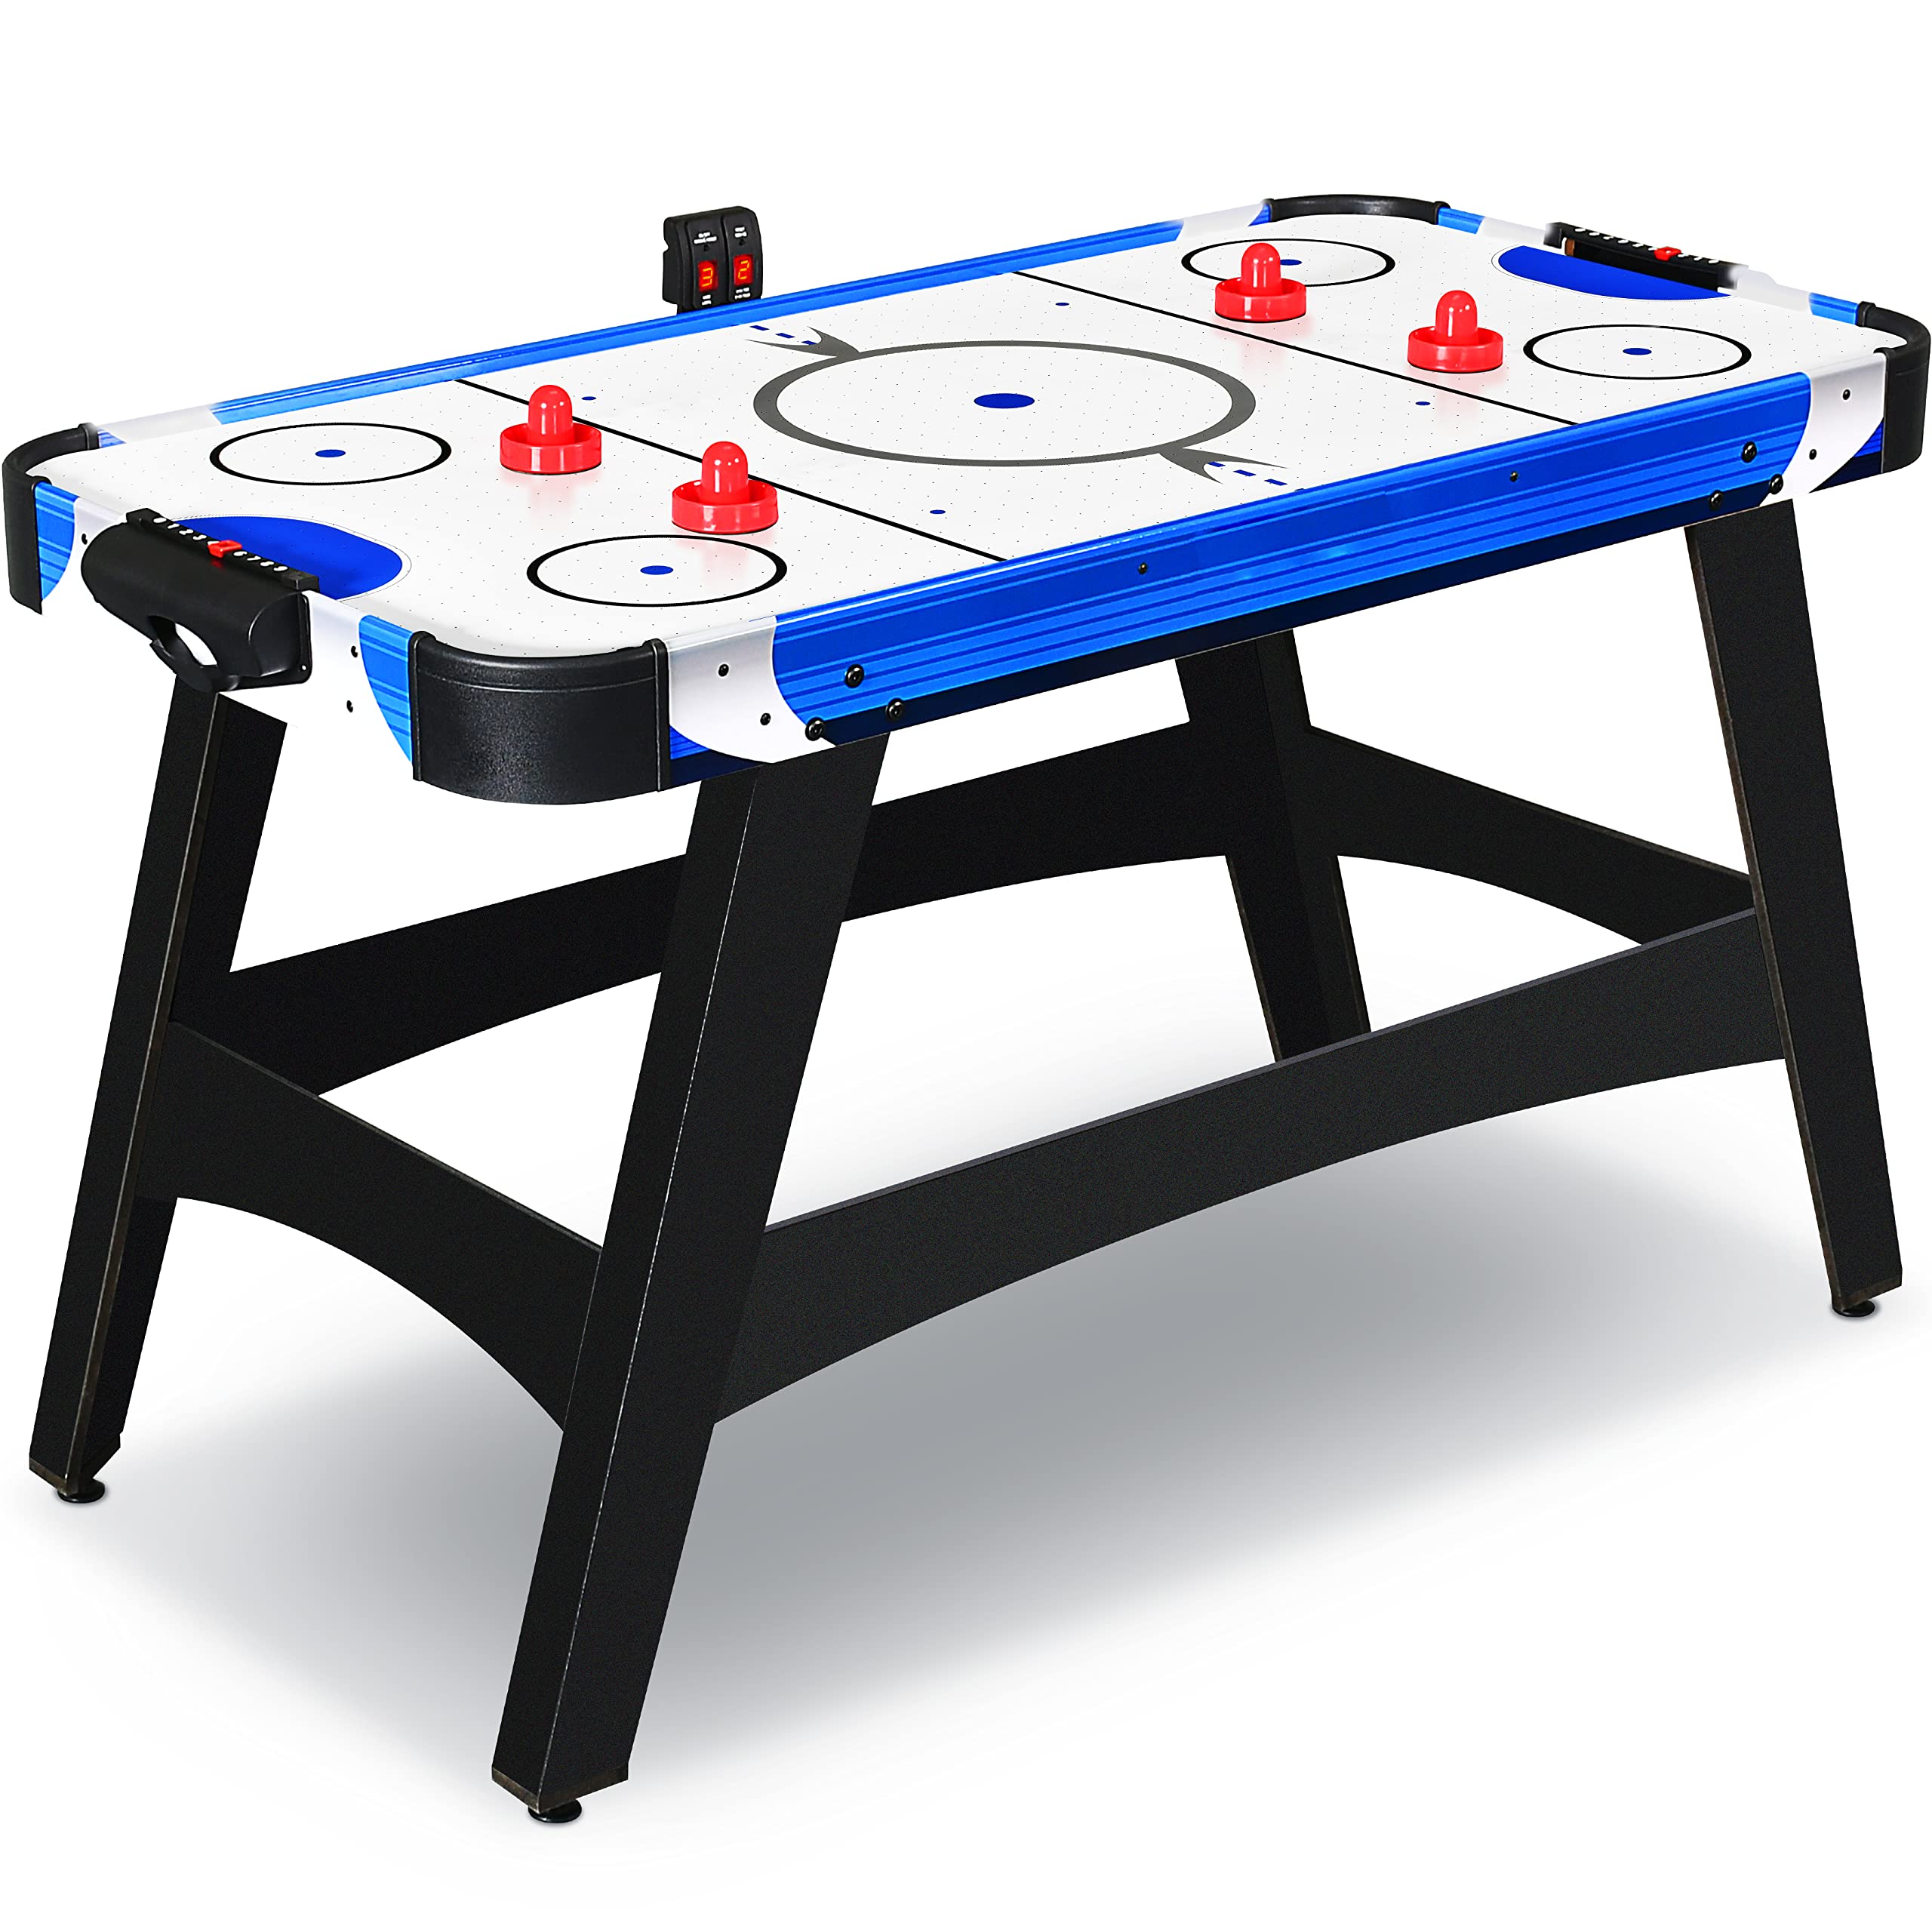 serenelifehome Powered Air Hockey Table, 45 ft 54AA Sports Arcade games, with complete Accessories, Digital LED Scoreboard, Built in Score Trac